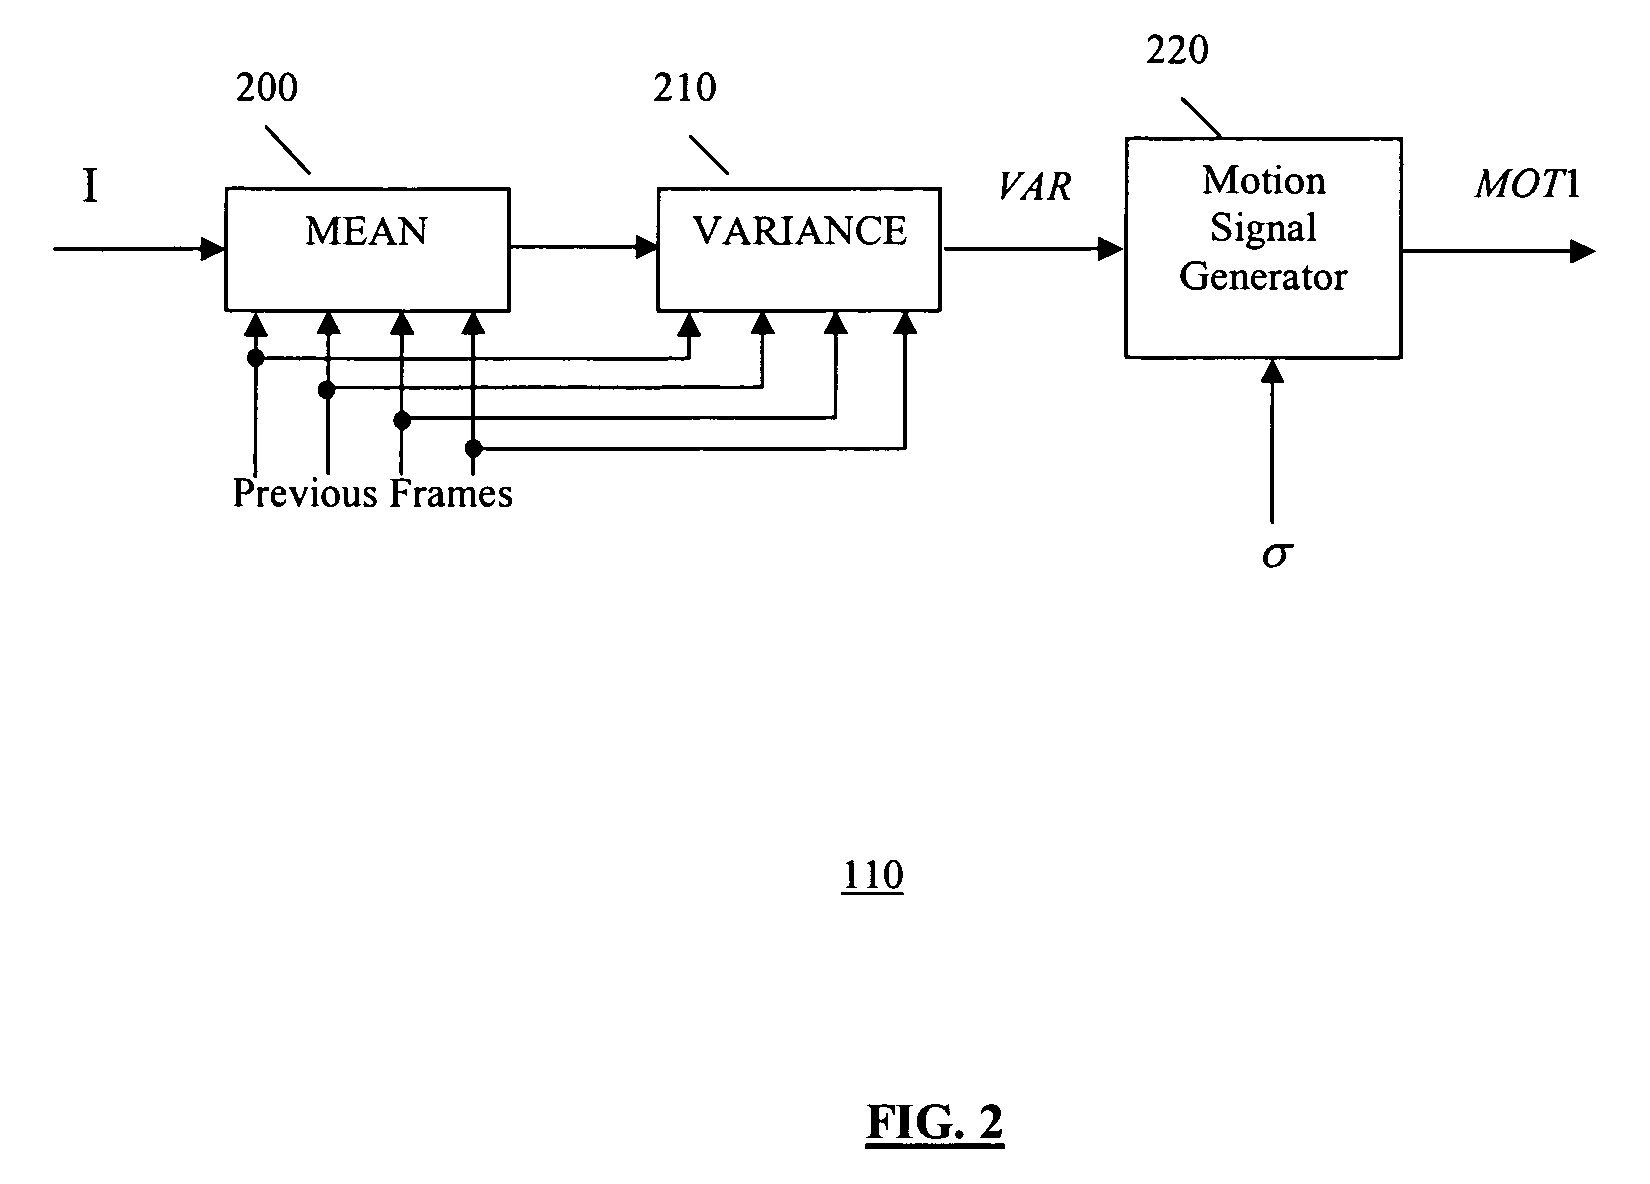 Motion adaptive noise reduction apparatus and method for video signals